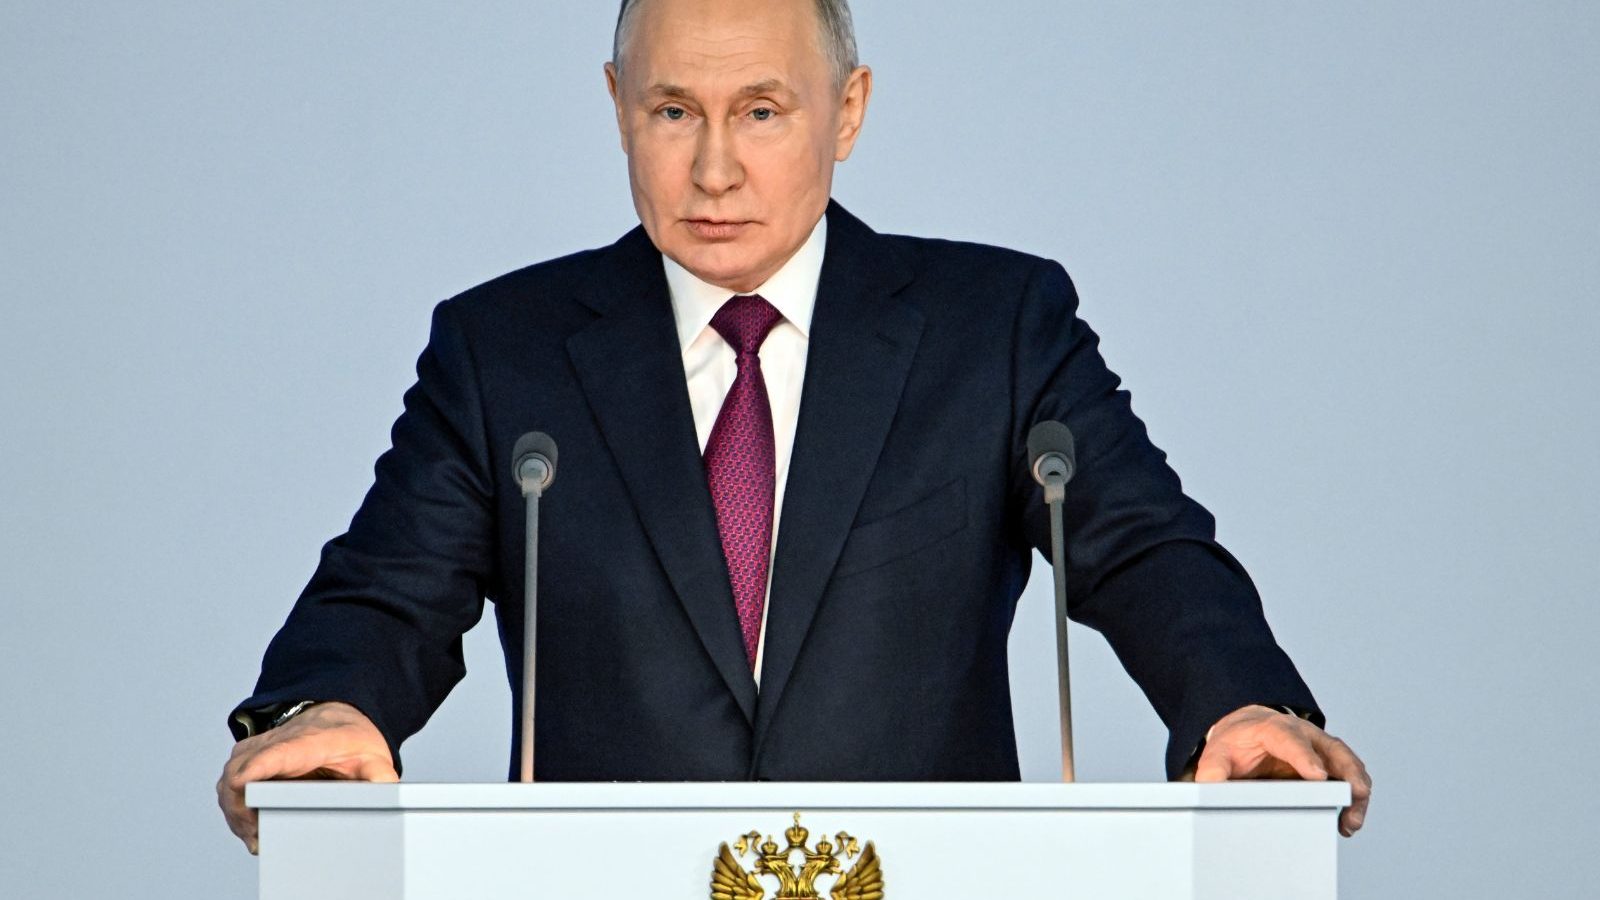 NATO Indirectly Taking Part in Ukraine Conflict with Arms Supplies: Vladimir Putin